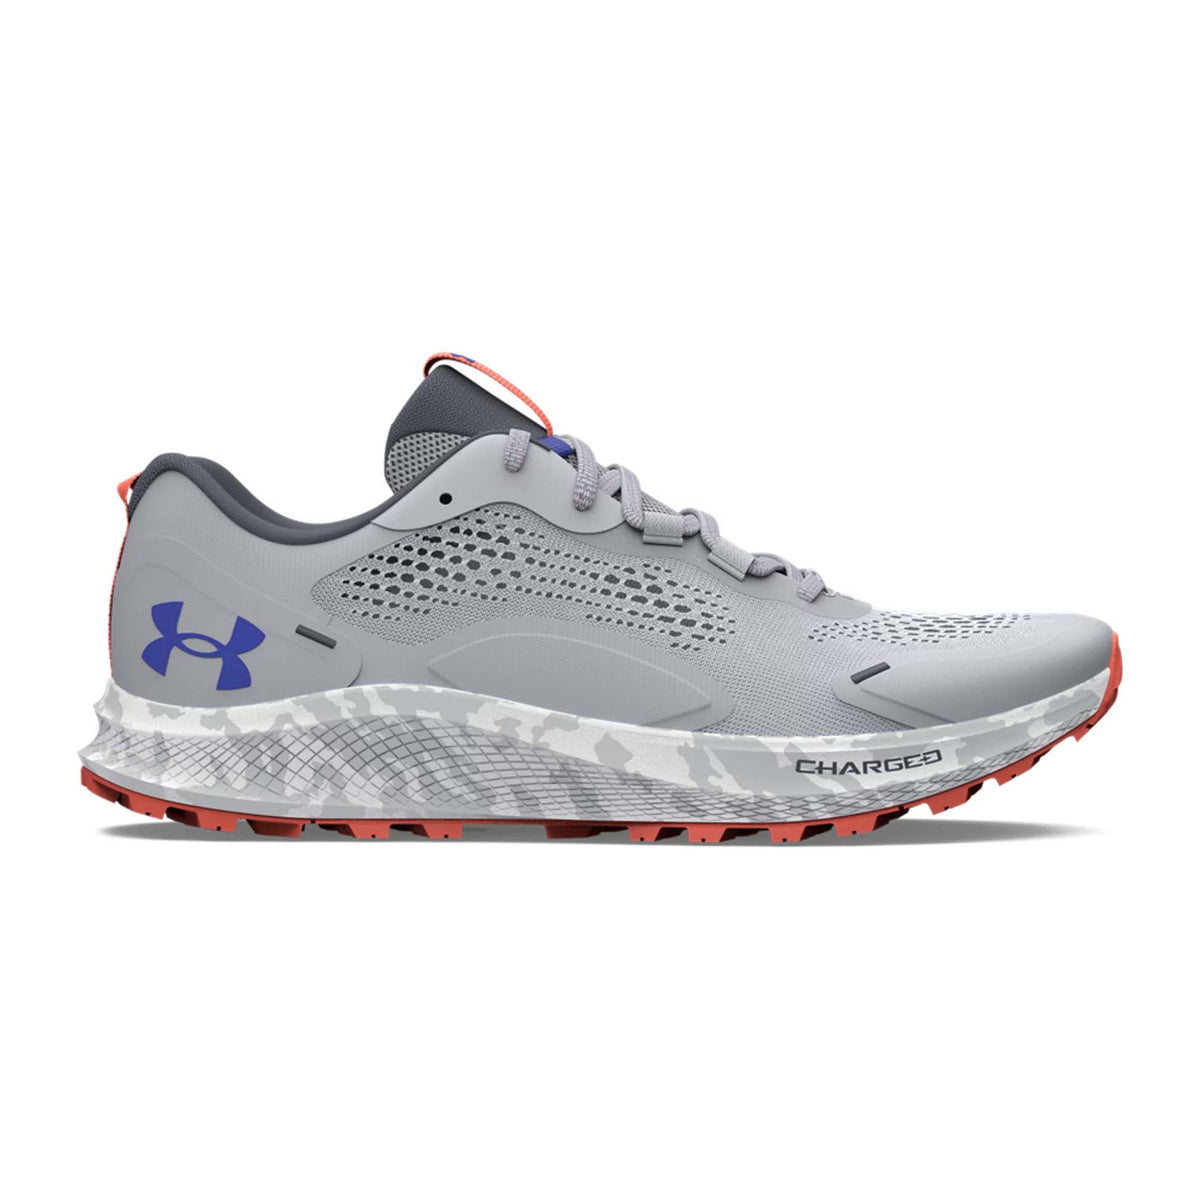 Under Armour Charged Bandit Trail 2 Womens Running Trainer